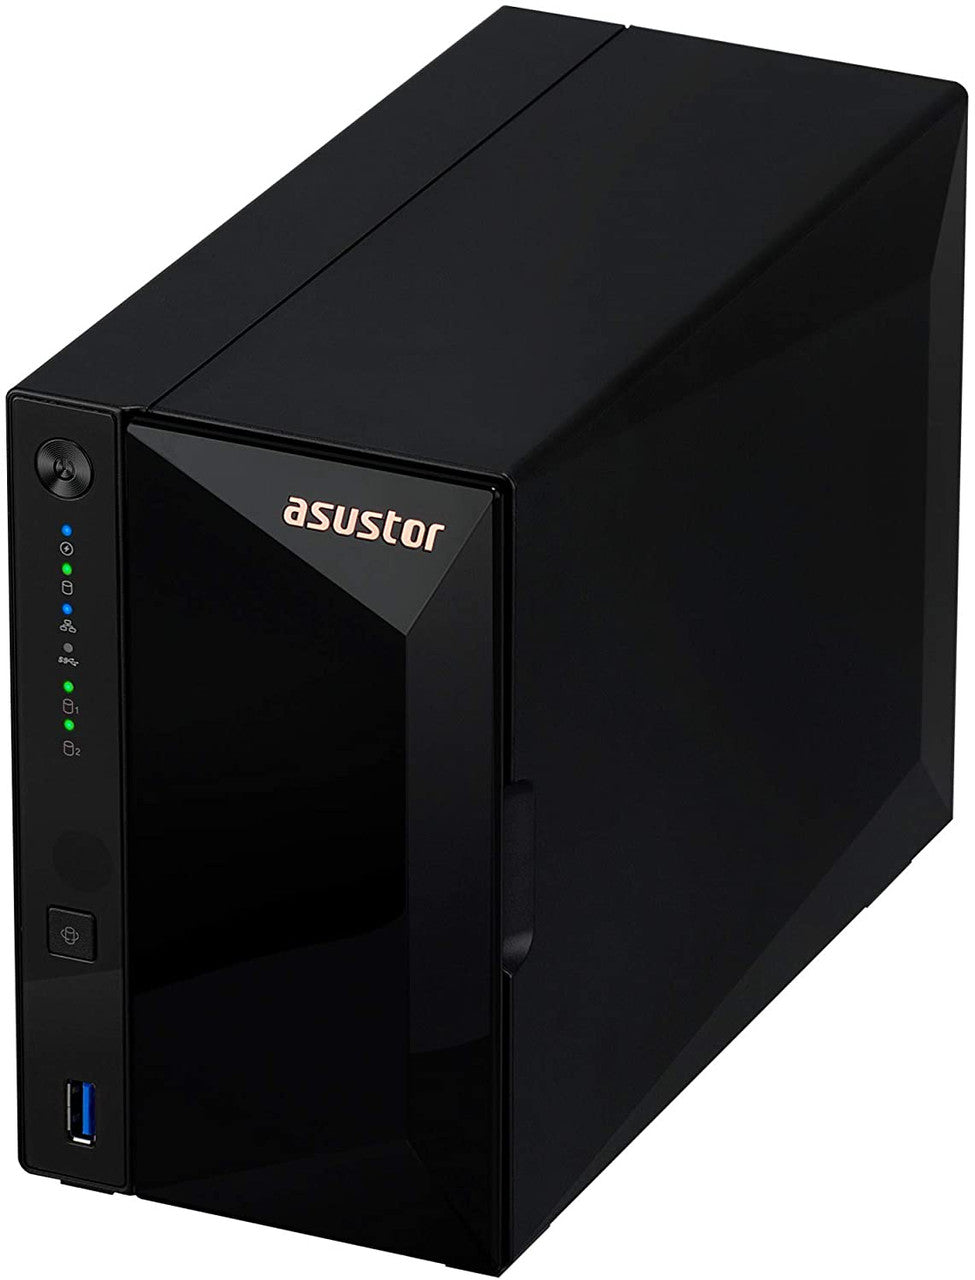 Asustor AS3302T 2-Bay Drivestor 2 PRO NAS with 2GB RAM and 8TB (2x4TB) Seagate Ironwolf NAS Drives Fully Assembled and Tested